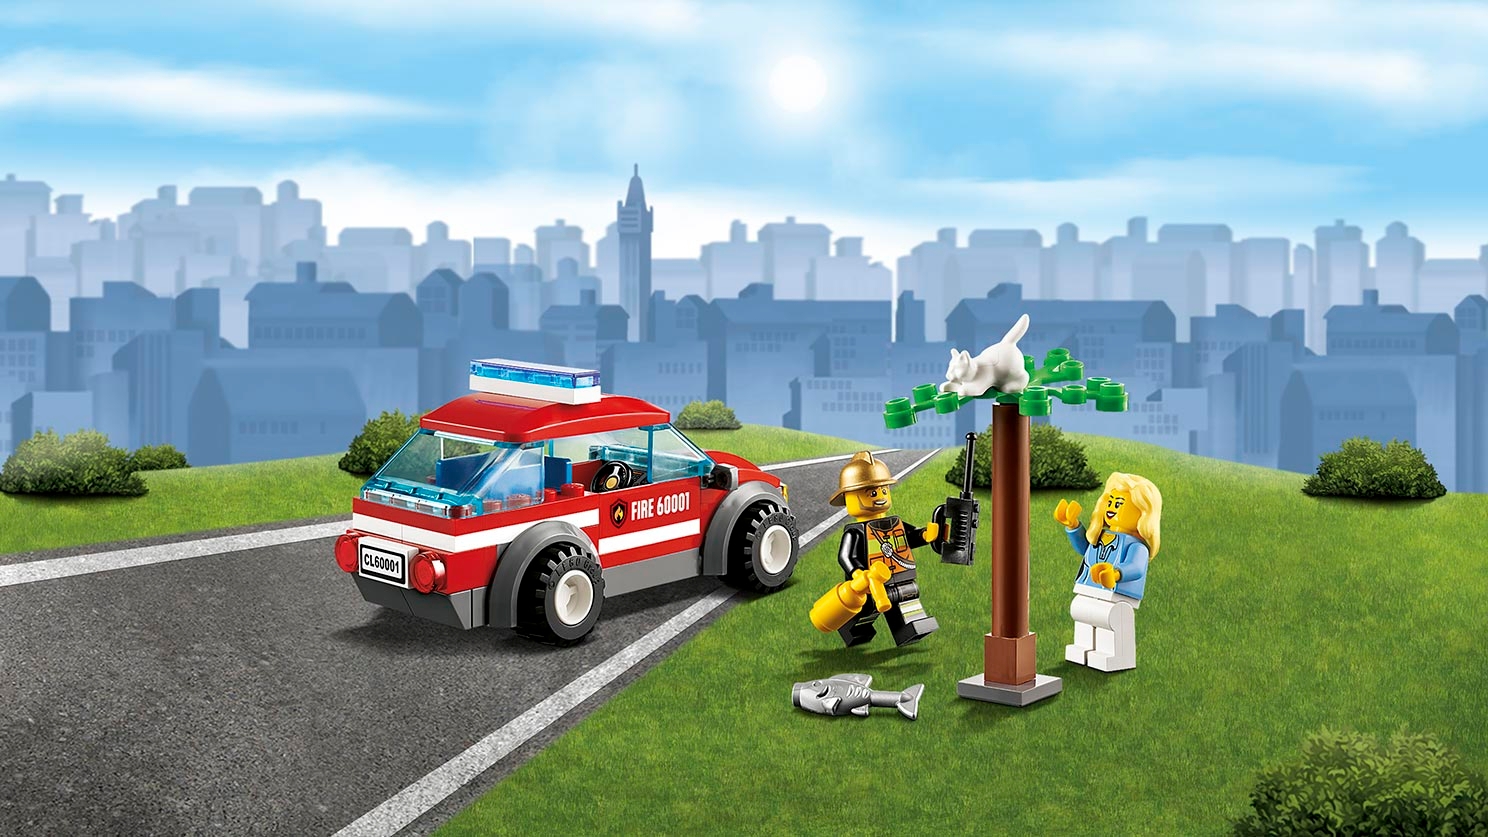 LEGO CITY 60001 Fire Chief Car Cat in Tree rescue woman girl boy fish NEW SEALED 